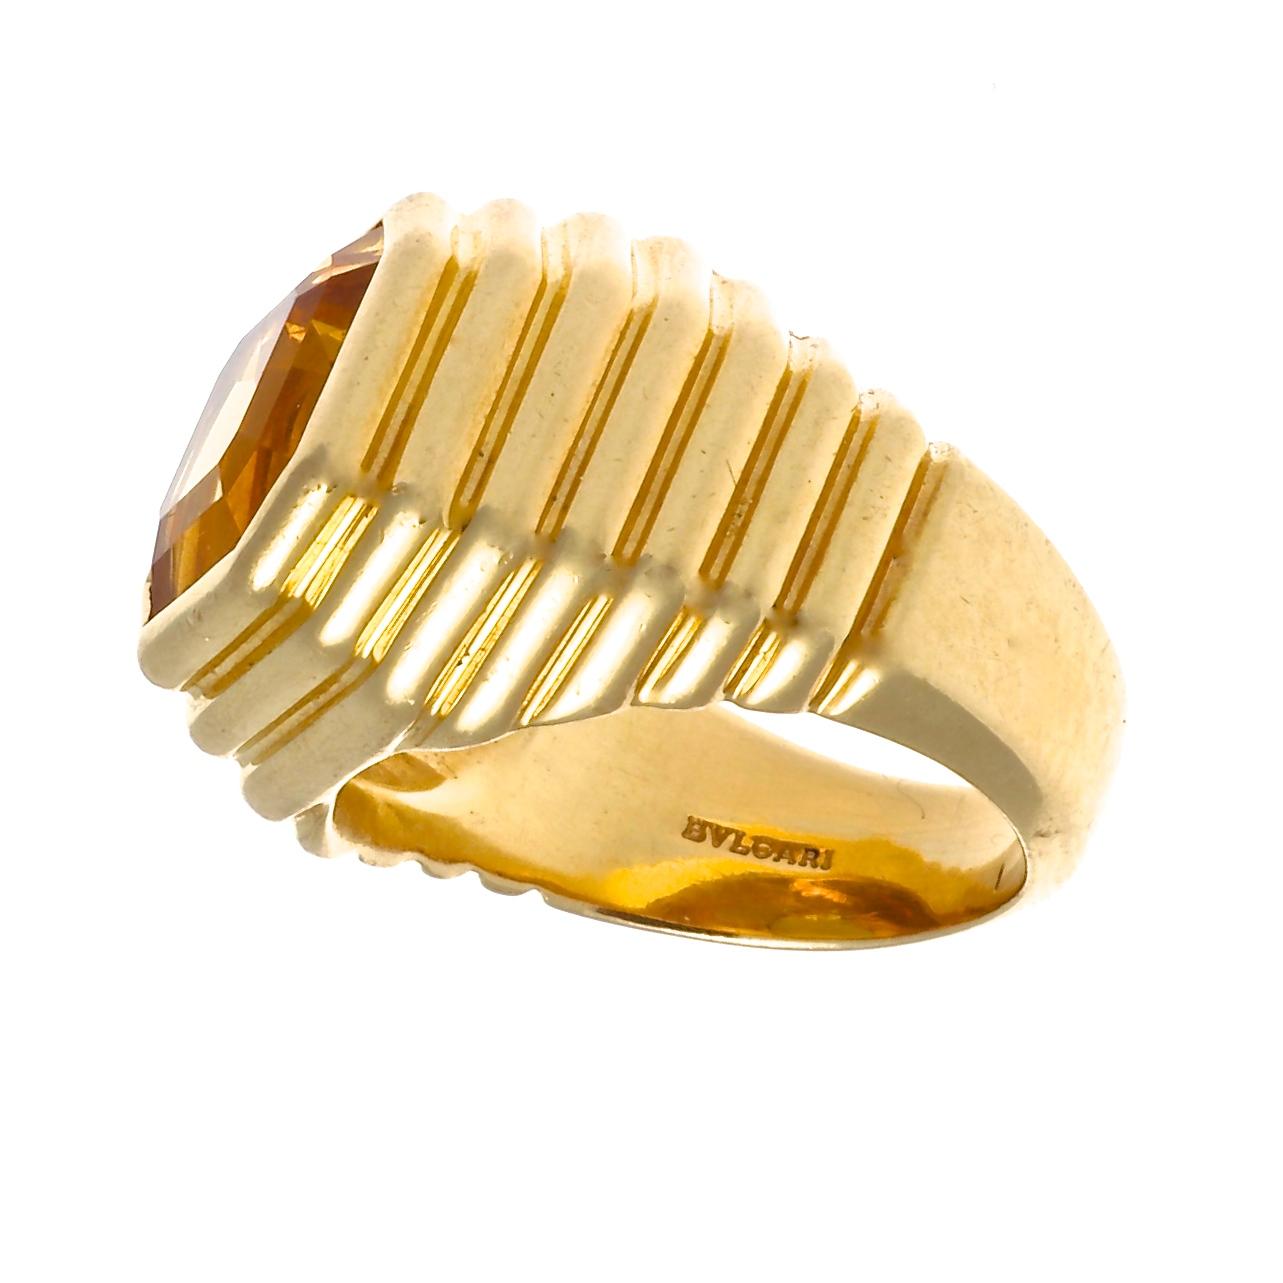 The beauty and elegance of Bulgari is uniquely expressed in this layered gold and citrine ring. The beautiful square emerald cut citrine is a dark golden color and is snugly set in rich 18k gold. Ring size is 5 and comes with complimentary ring